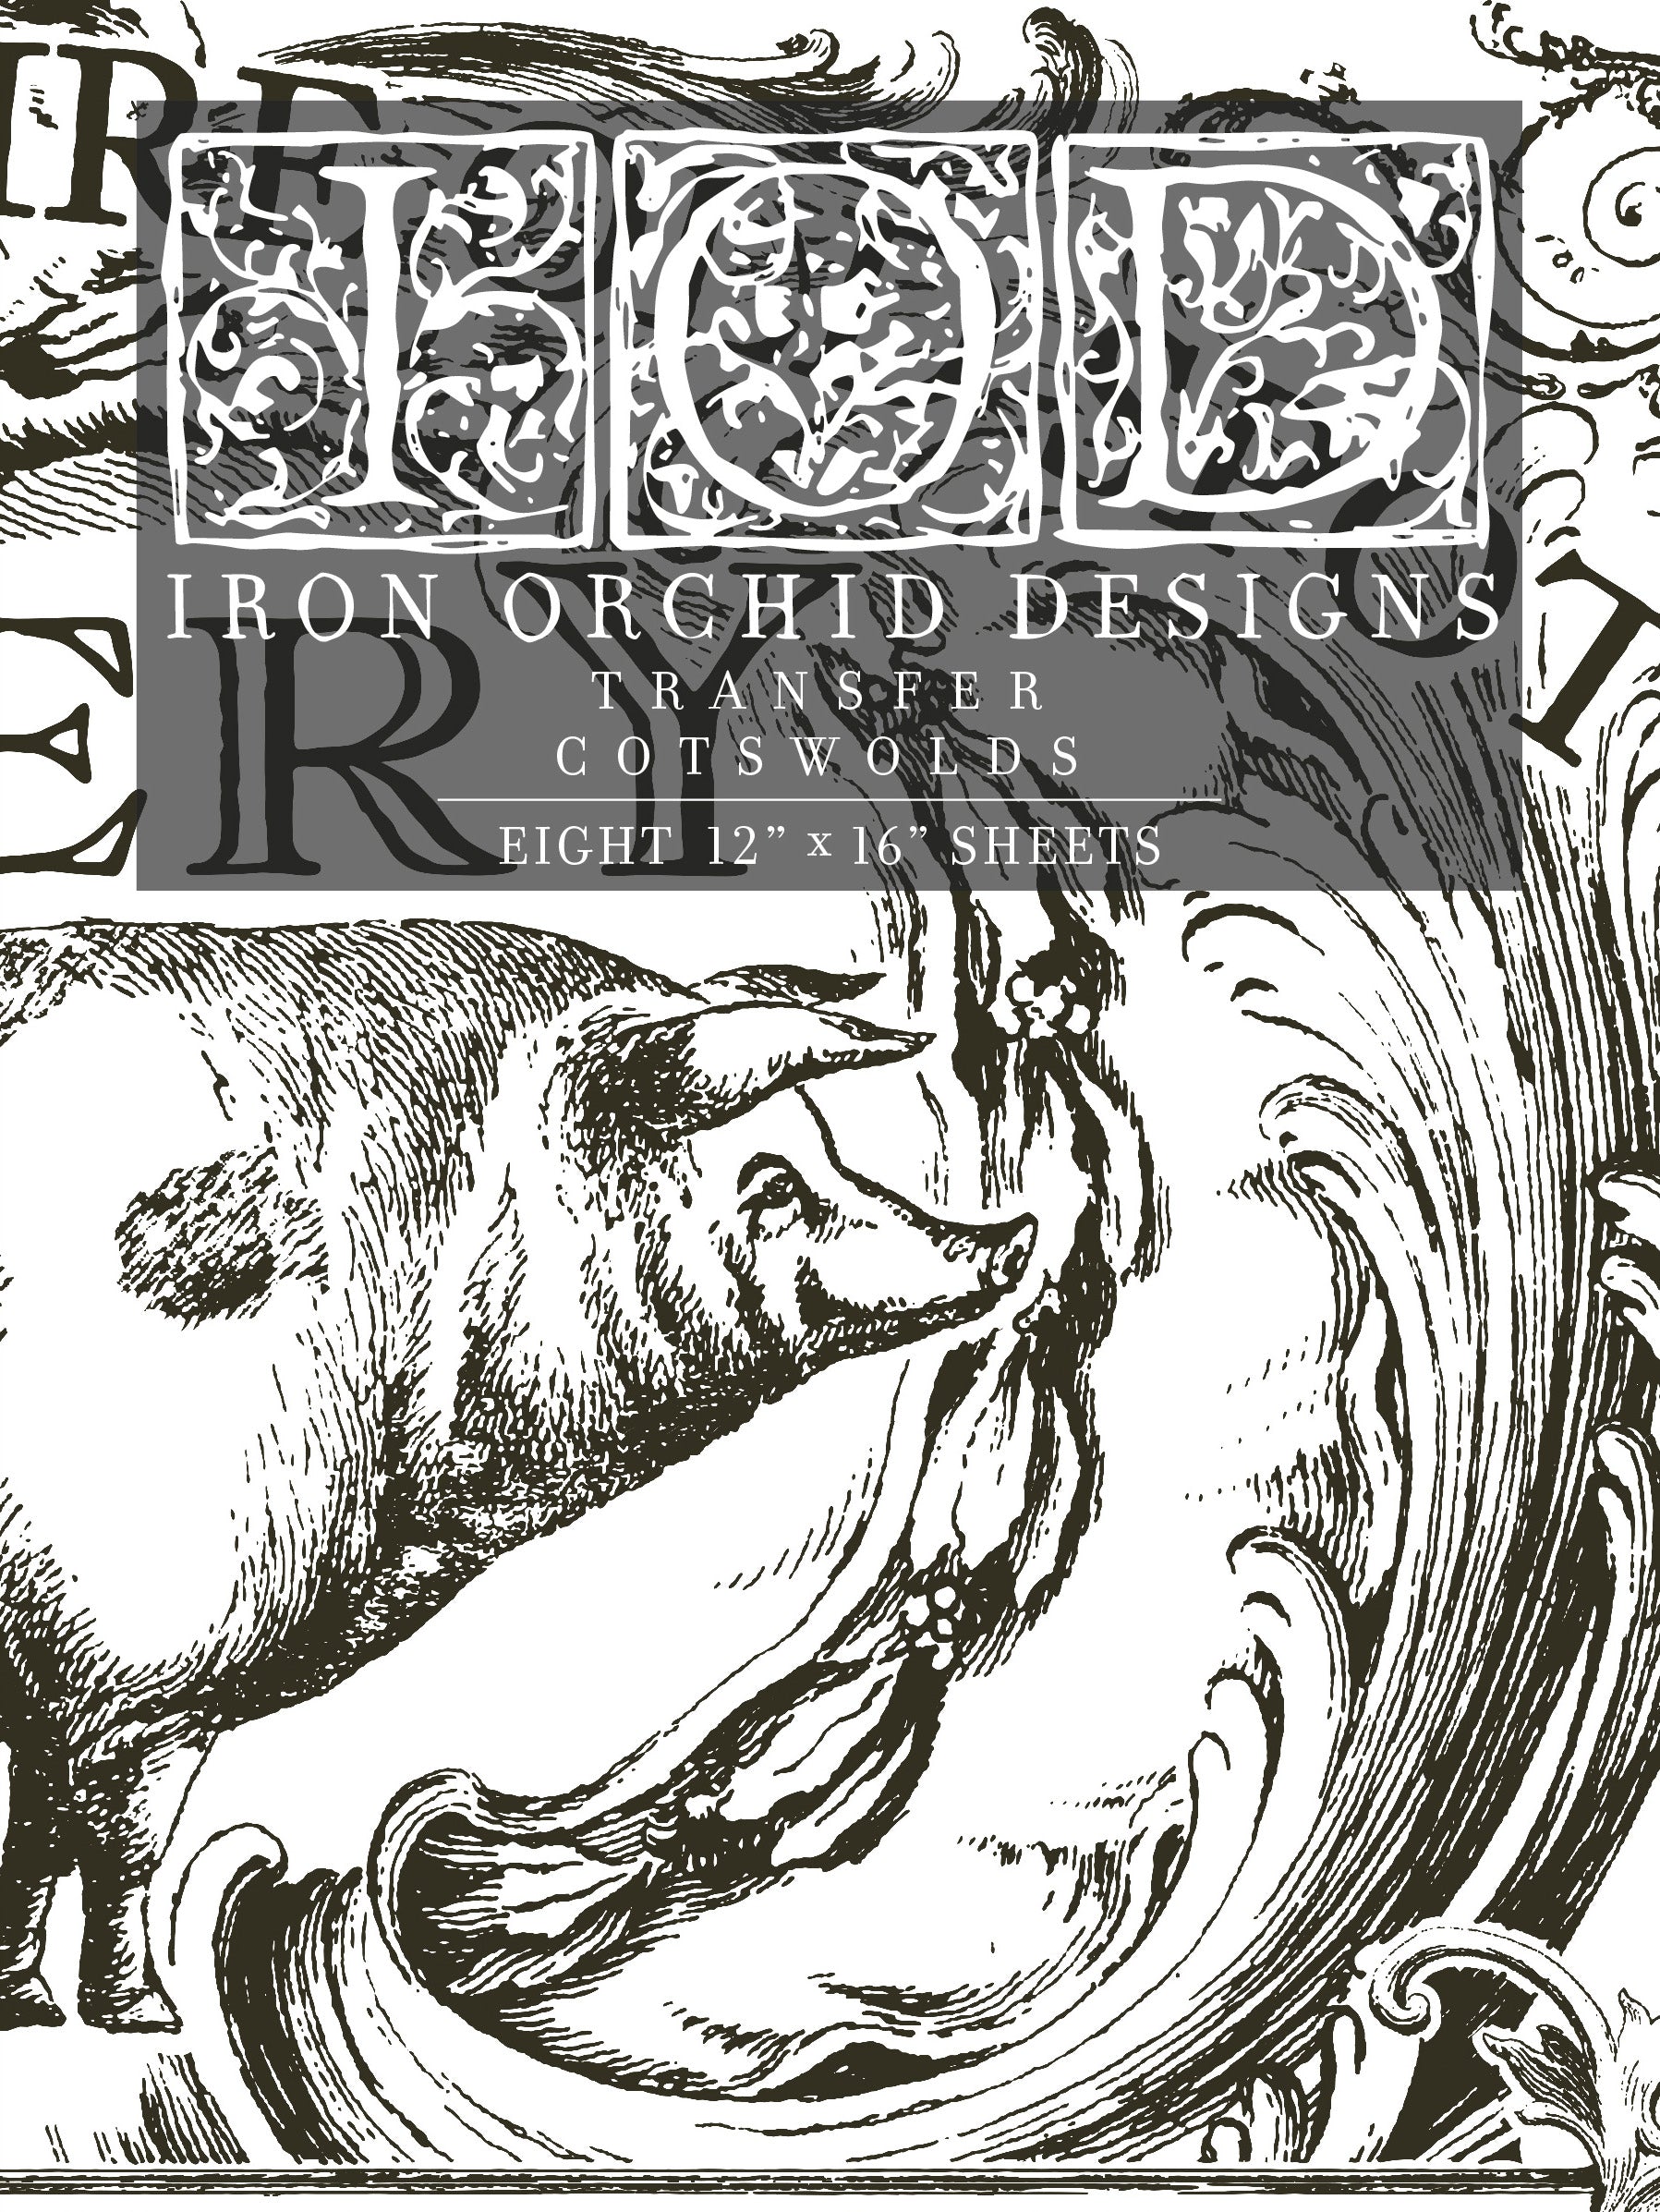 Cotswolds IOD Transfer 12x16 Pad™ Iron Orchid Designs, LLC.